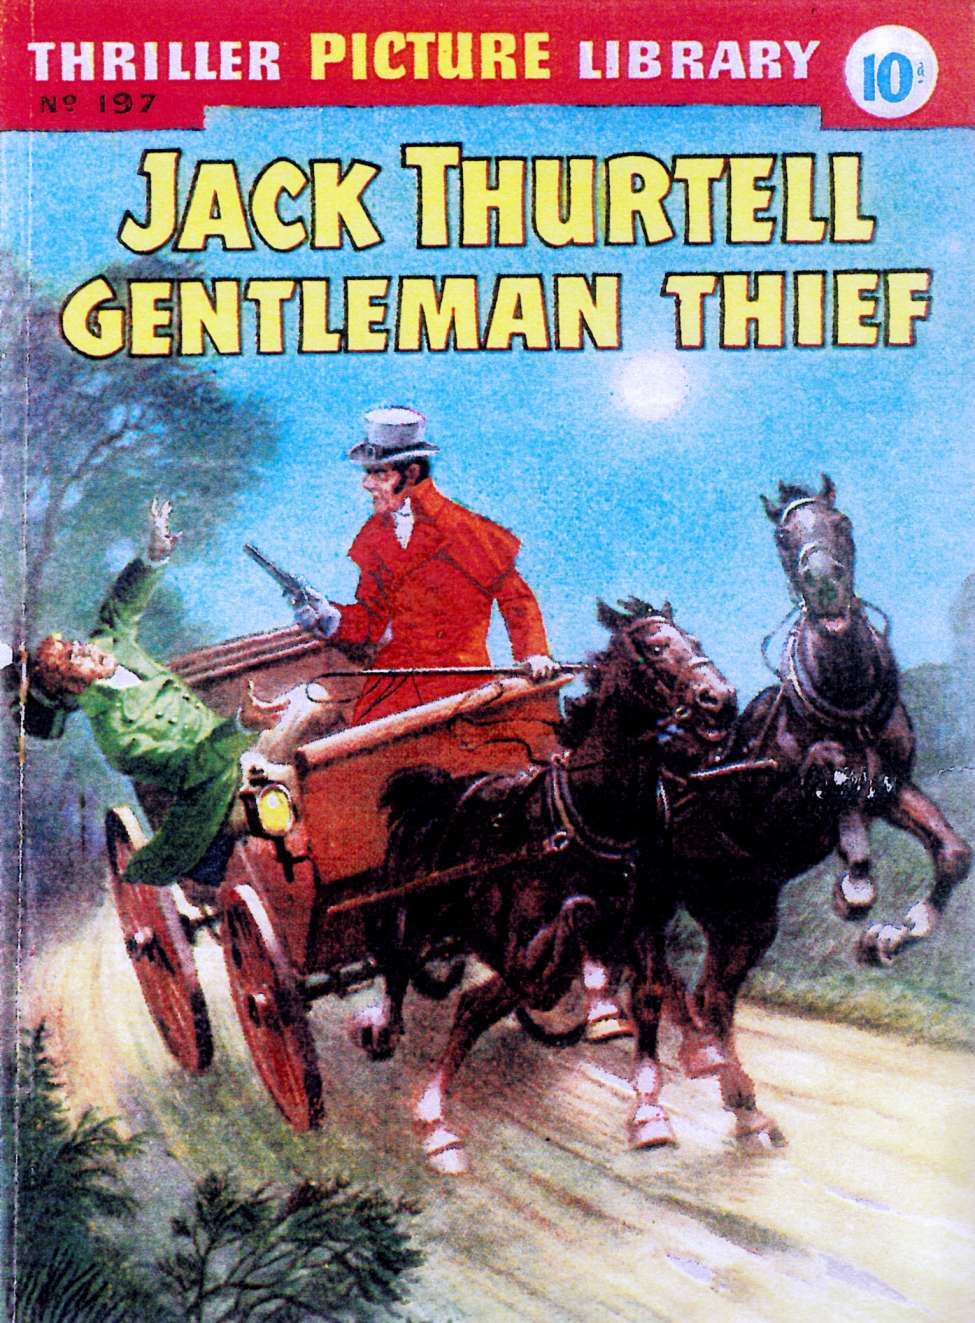 Comic Book Cover For Thriller Picture Library 197 - Jack Thurtell Gentleman Thief